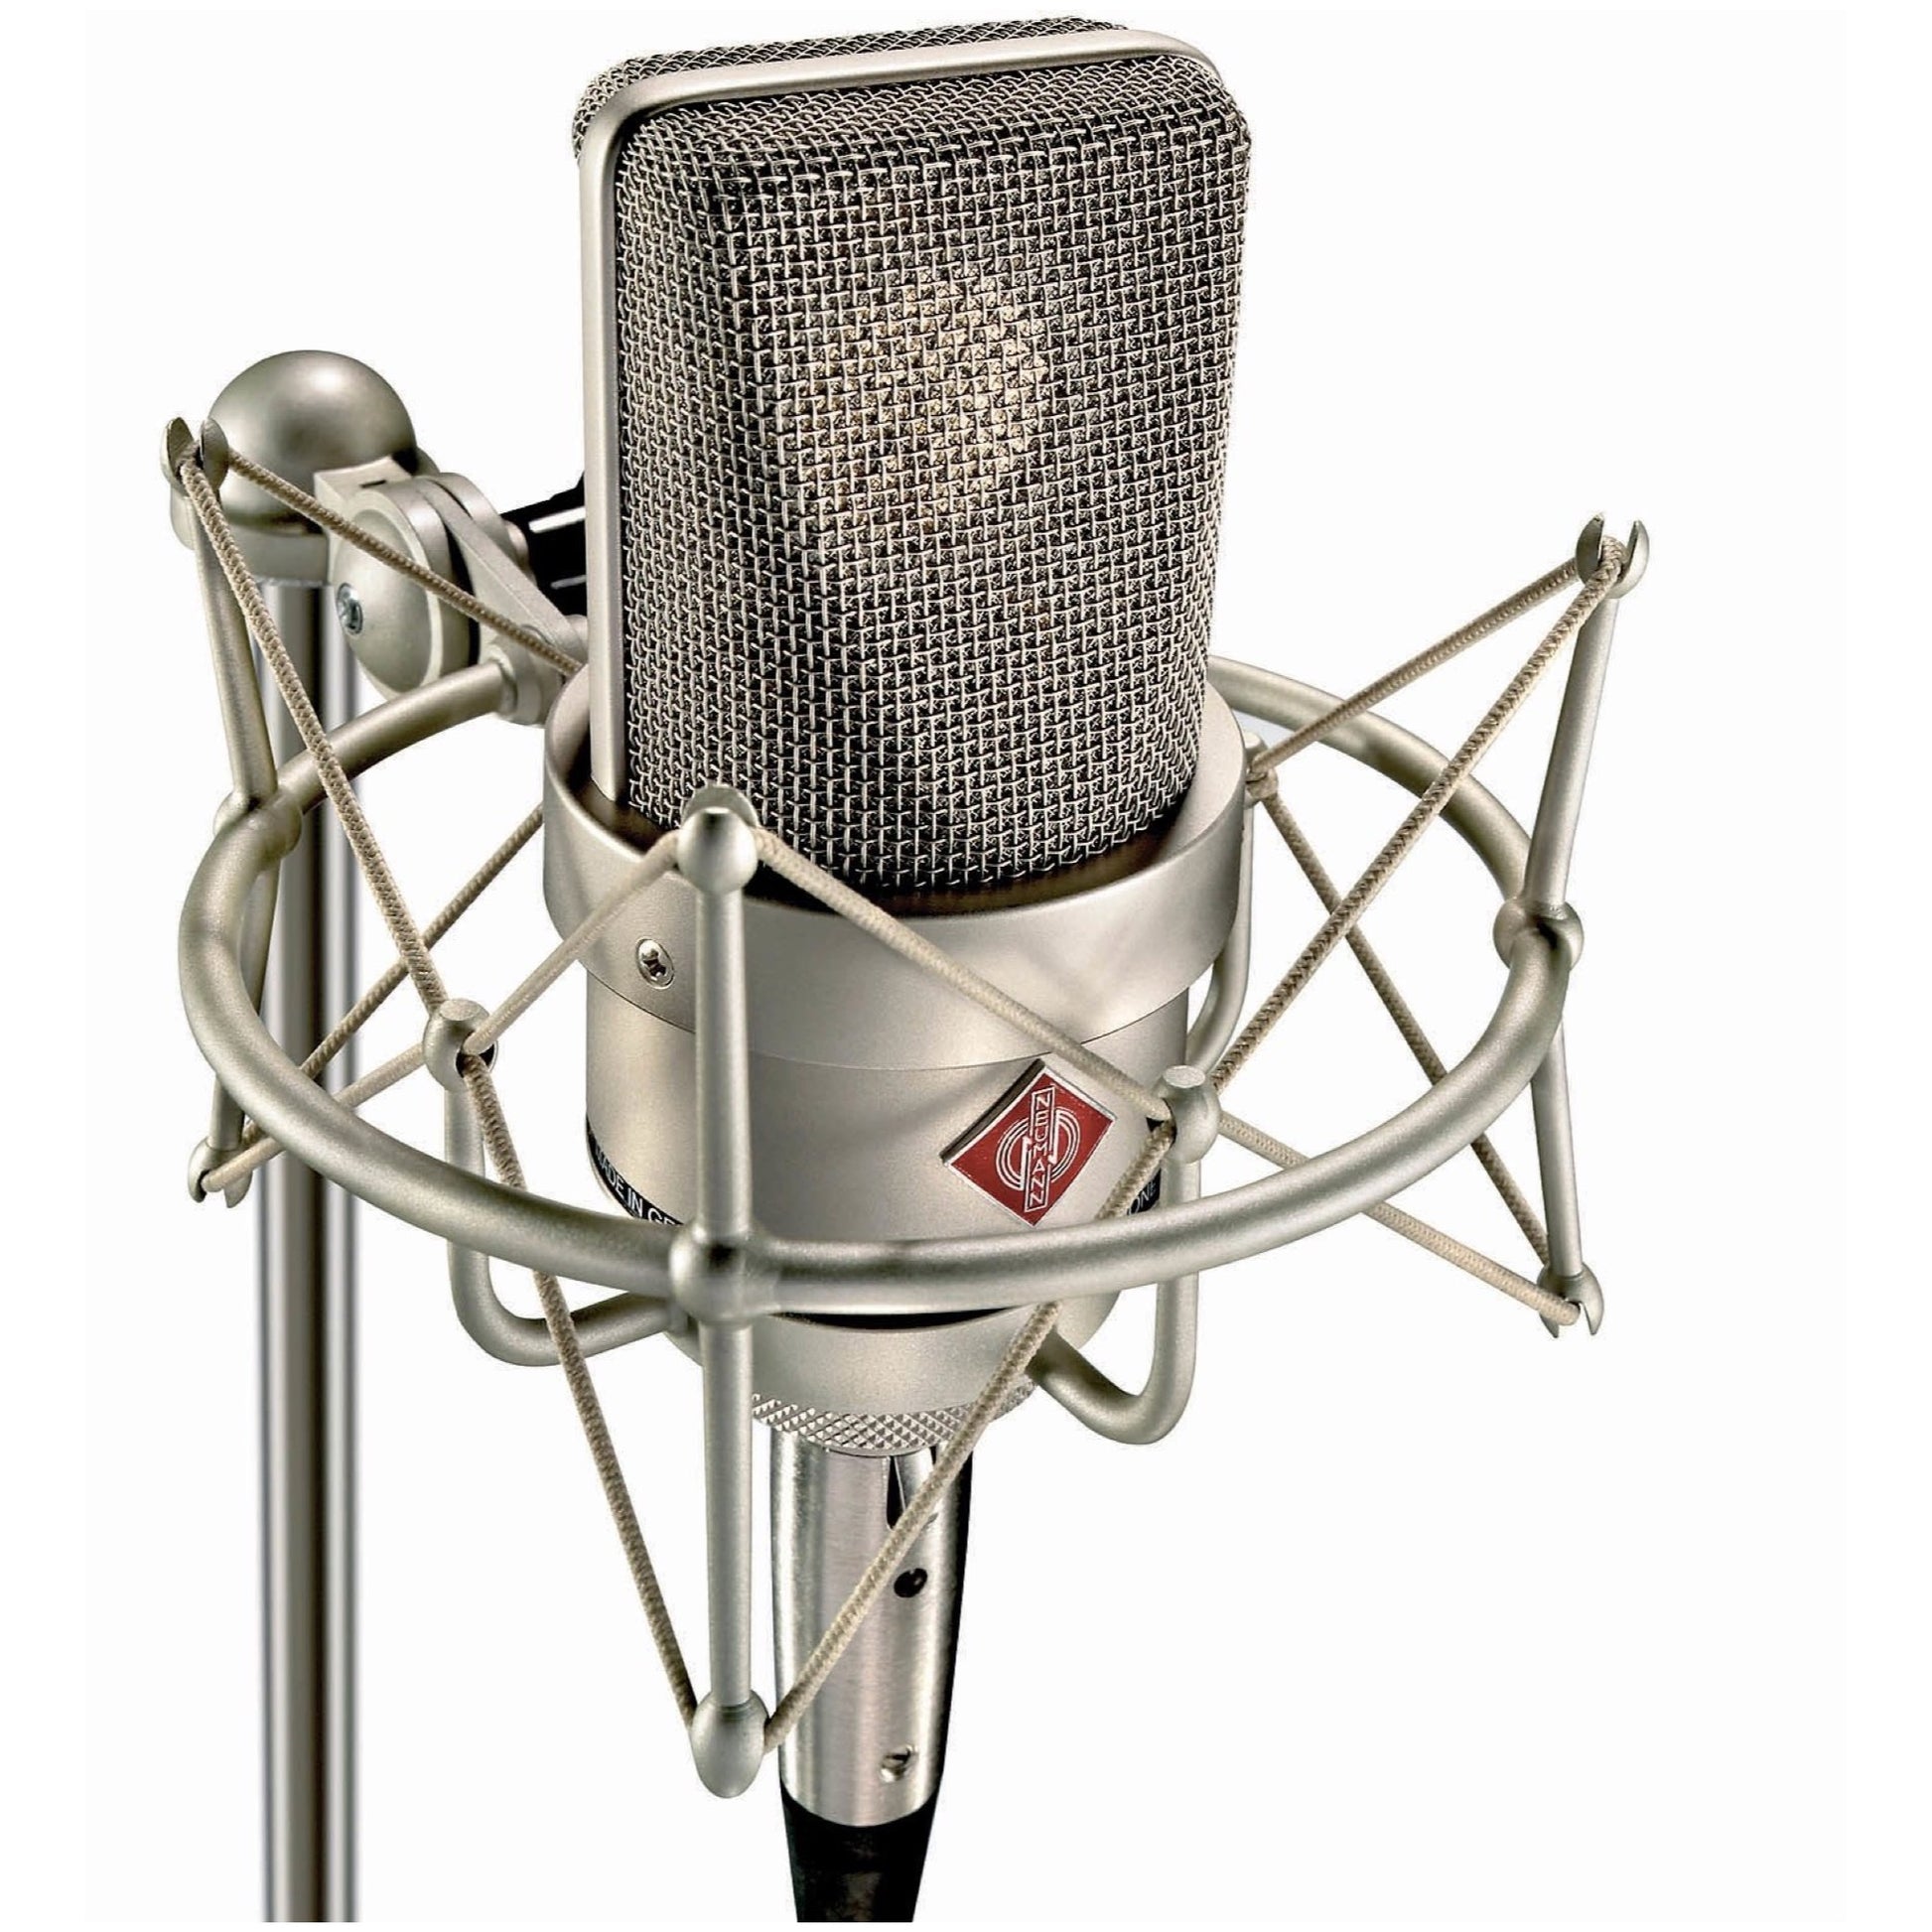 Neumann TLM 103 Anniversary Large-Diaphragm Condenser Microphone with Shockmount and Case, Nickel